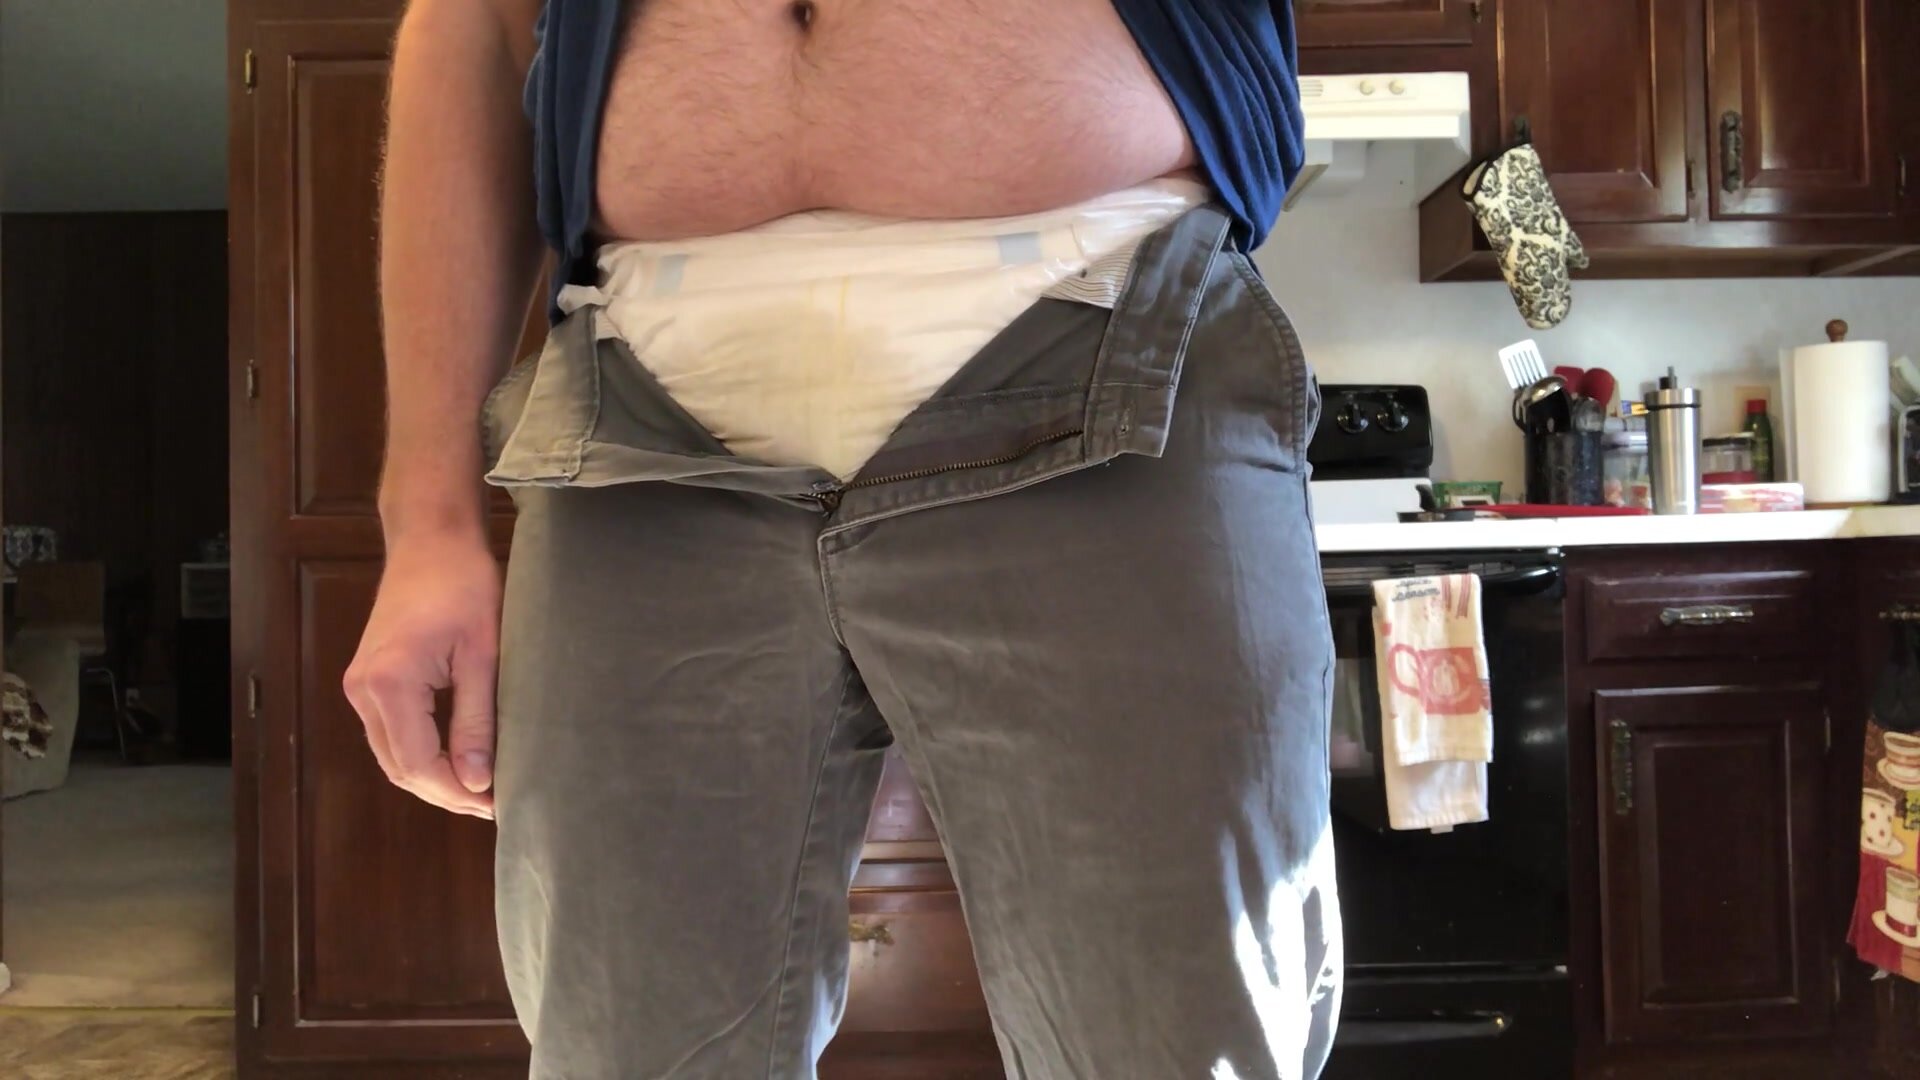 Filling my diaper in my work clothes